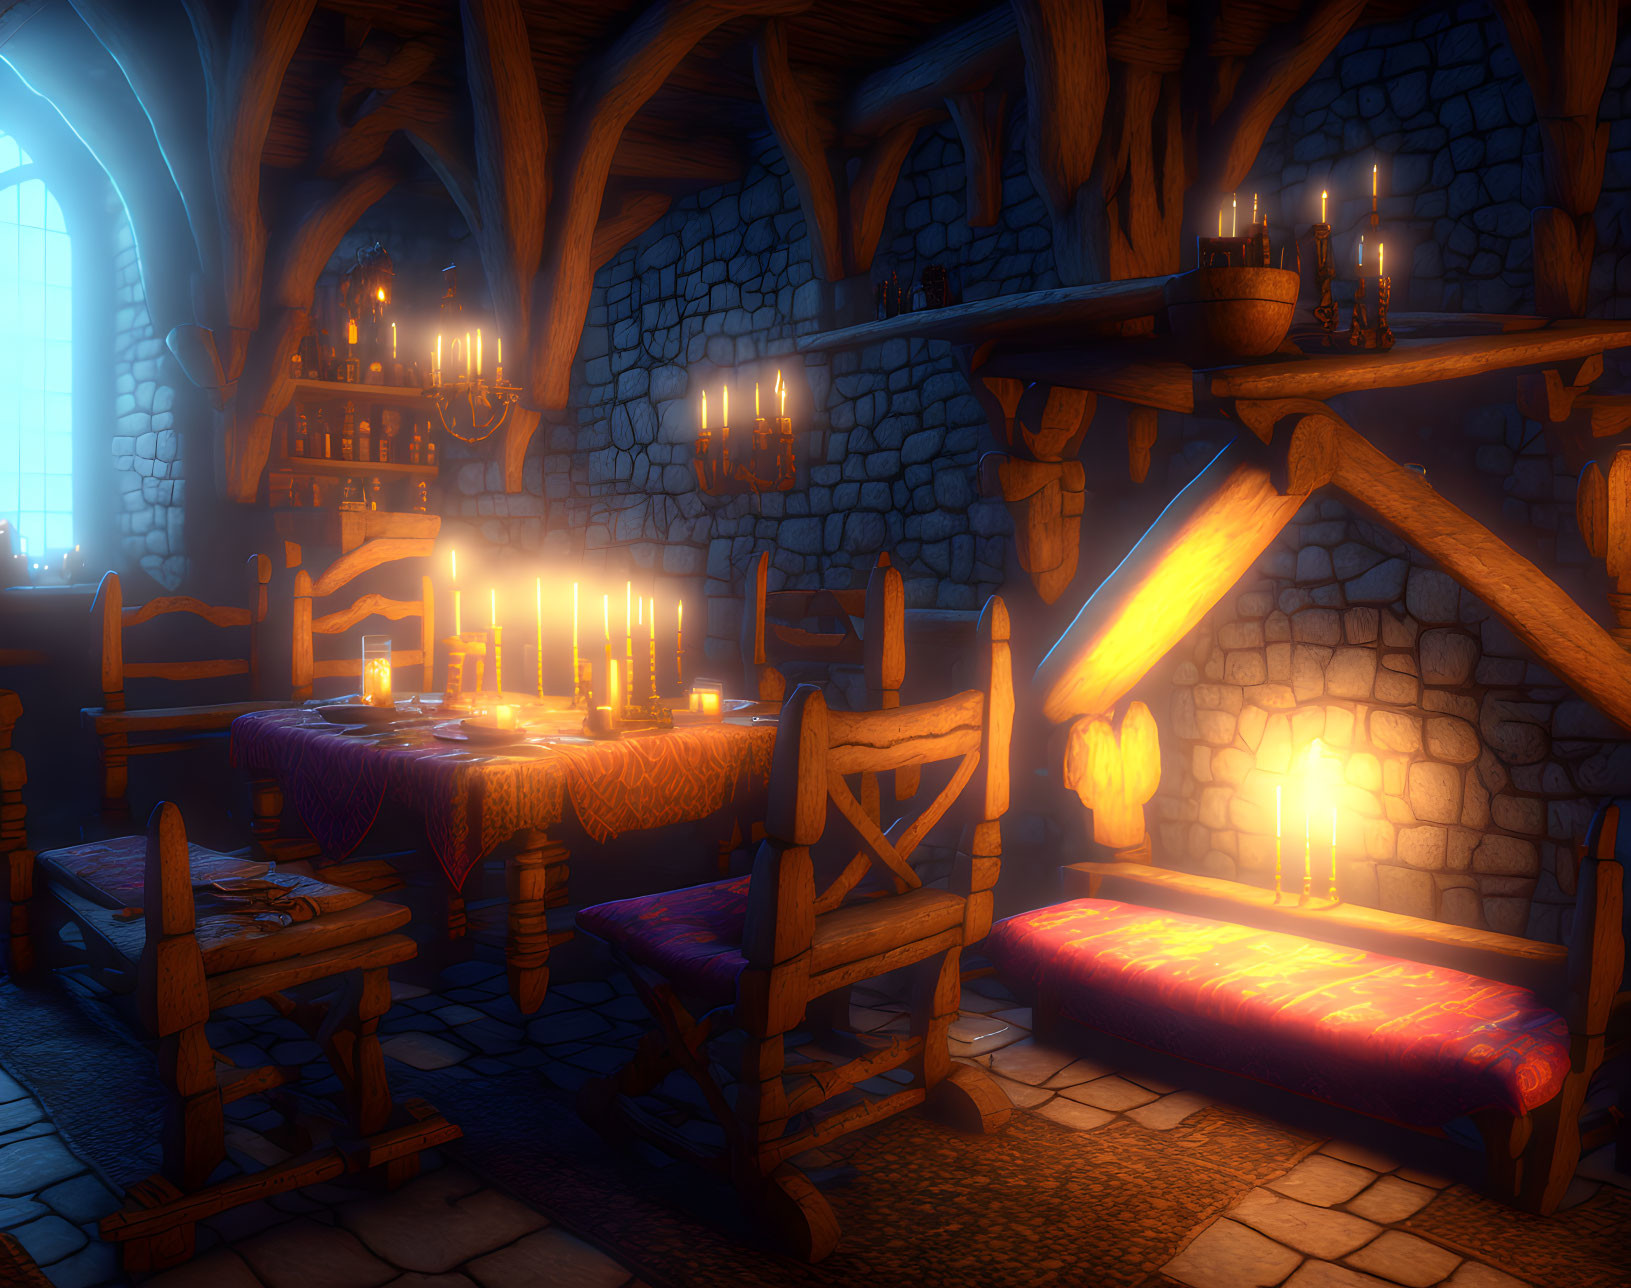 Medieval tavern interior with wooden tables, benches, candles, fireplace, stone walls, arched ceiling